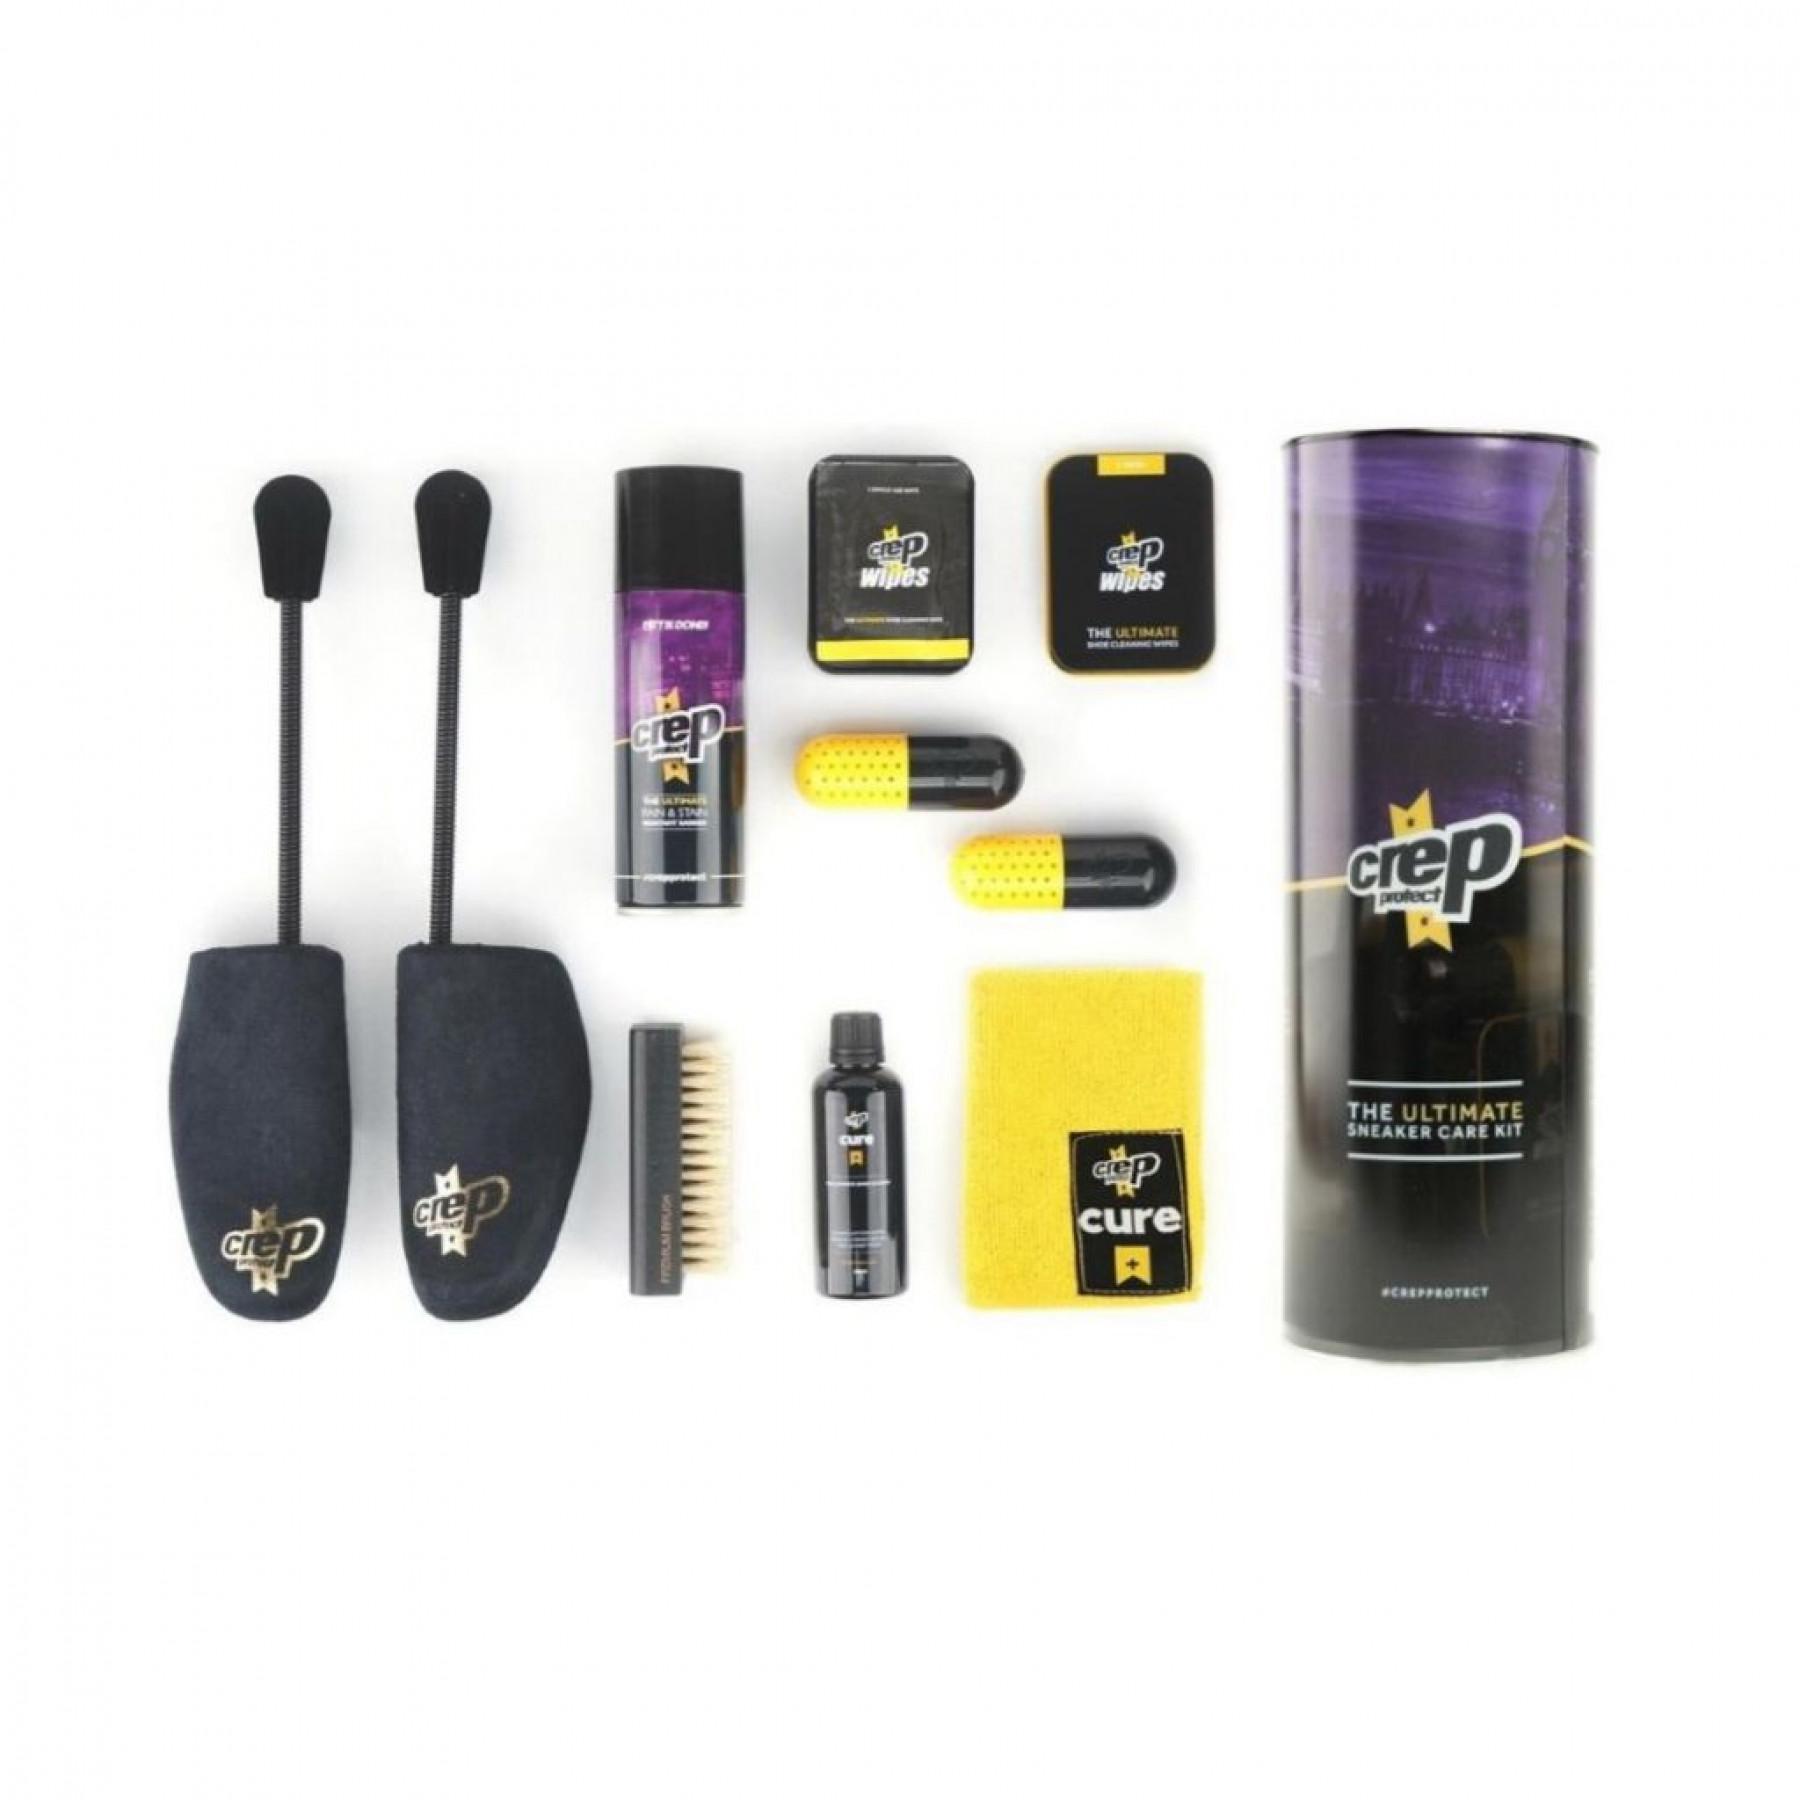 Coffret Crep Protect "starter pack"